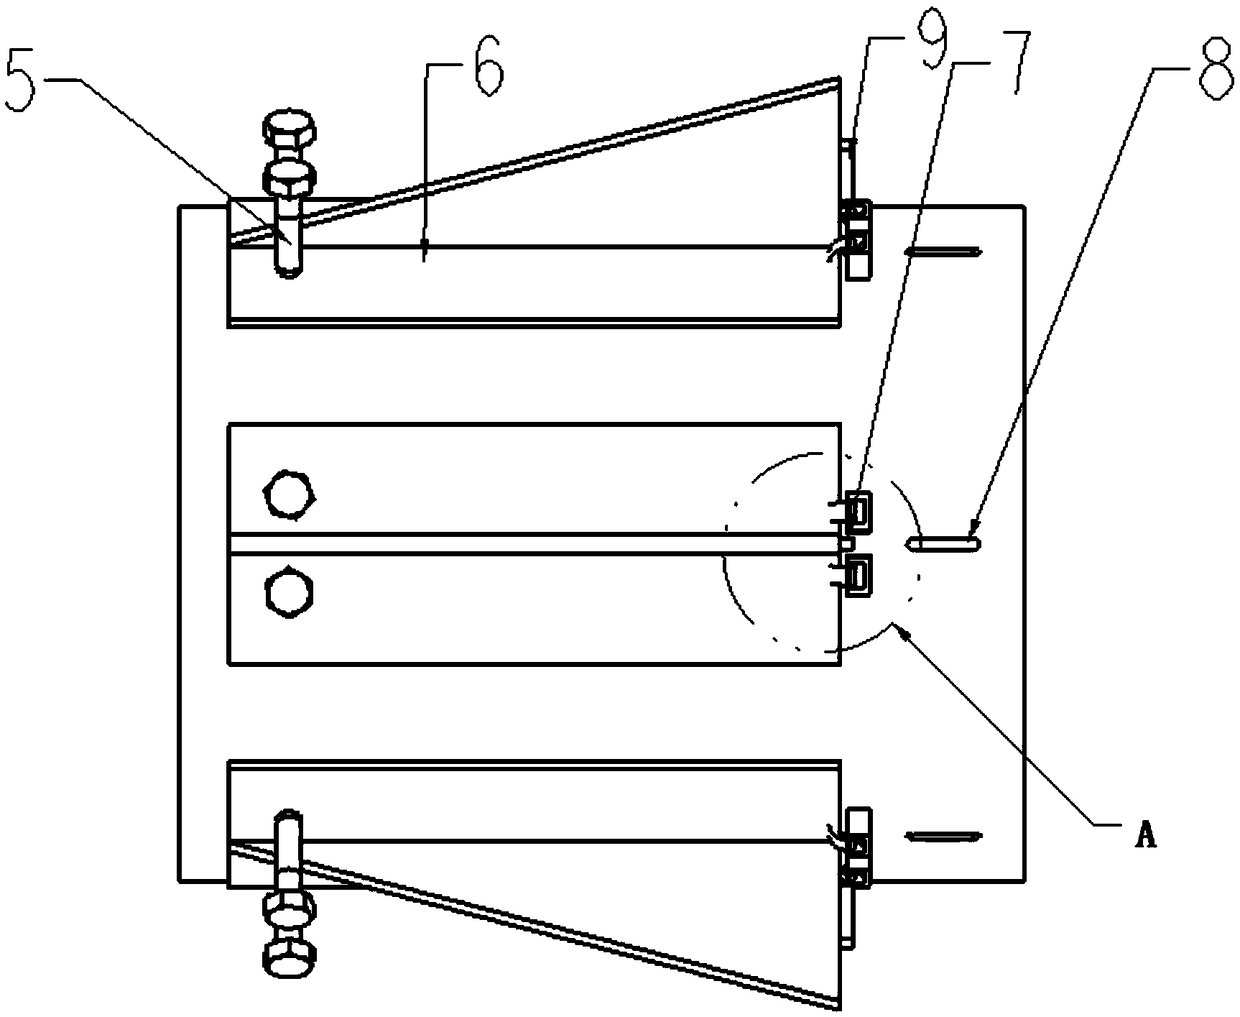 Expandable foreign object penetration limiting device